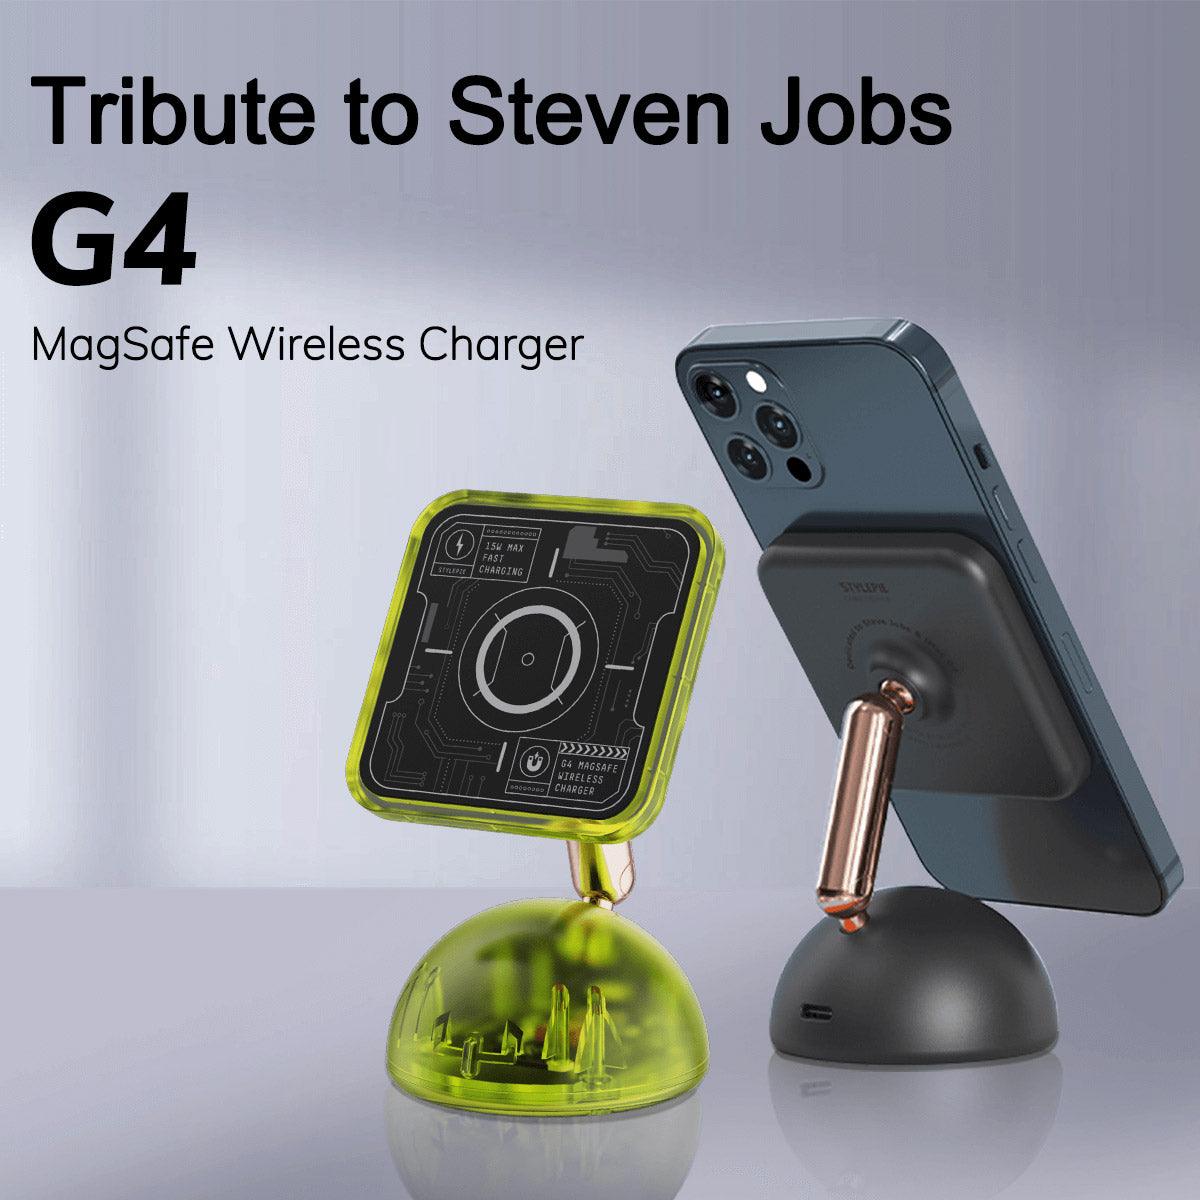 Longsea Magfit G4 Wireless Charger For iPhone 14/13/12 with Retro iMAC G4 Style - Magfit